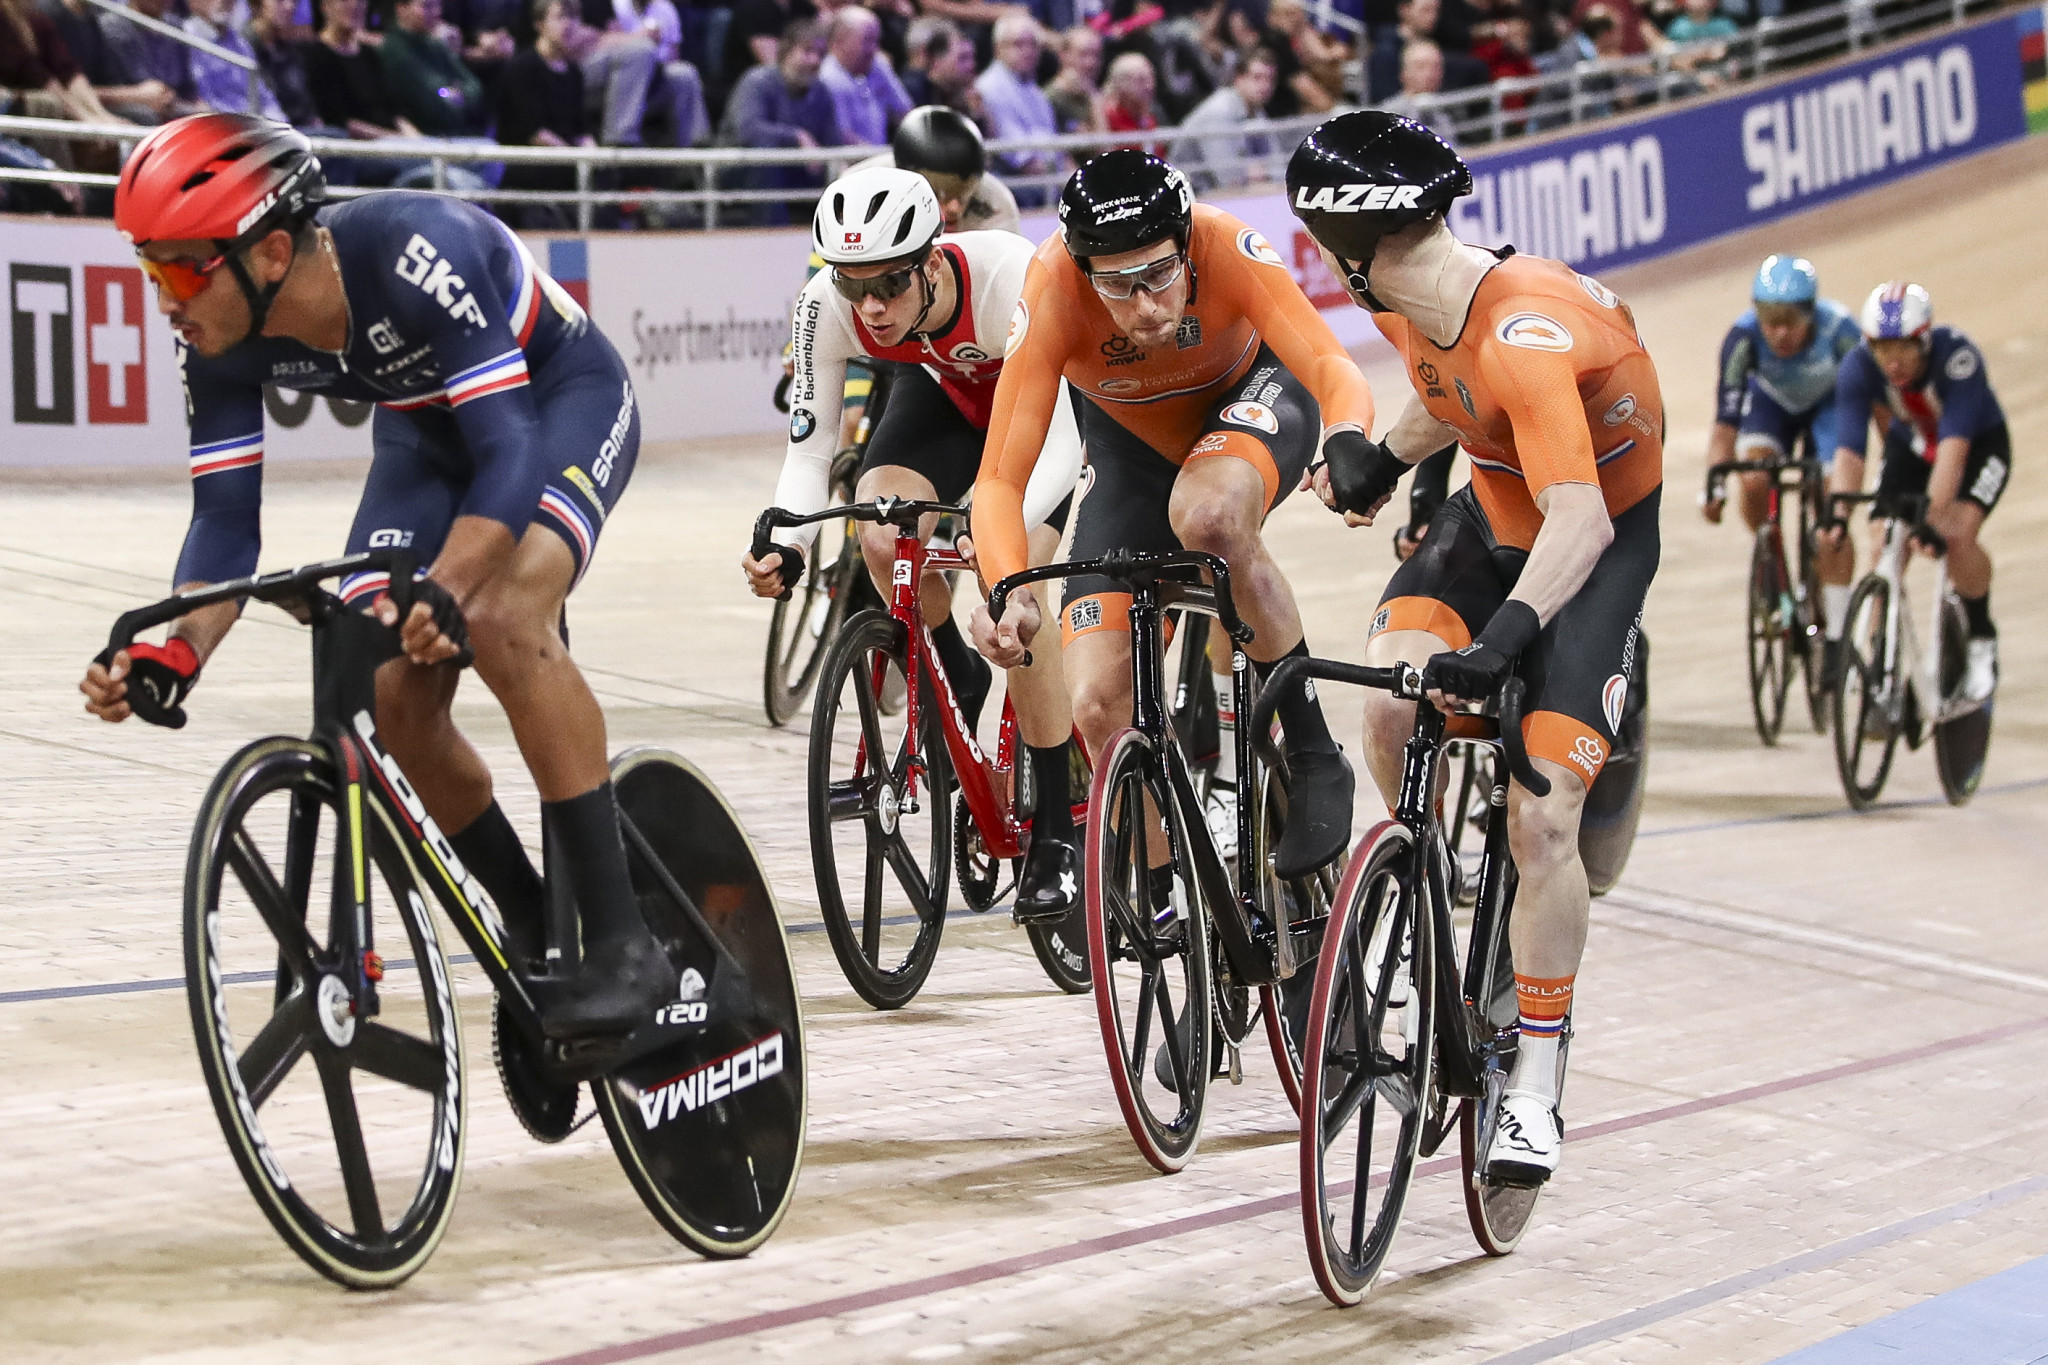 UCI Track Cycling World Championships moved to Roubaix in France